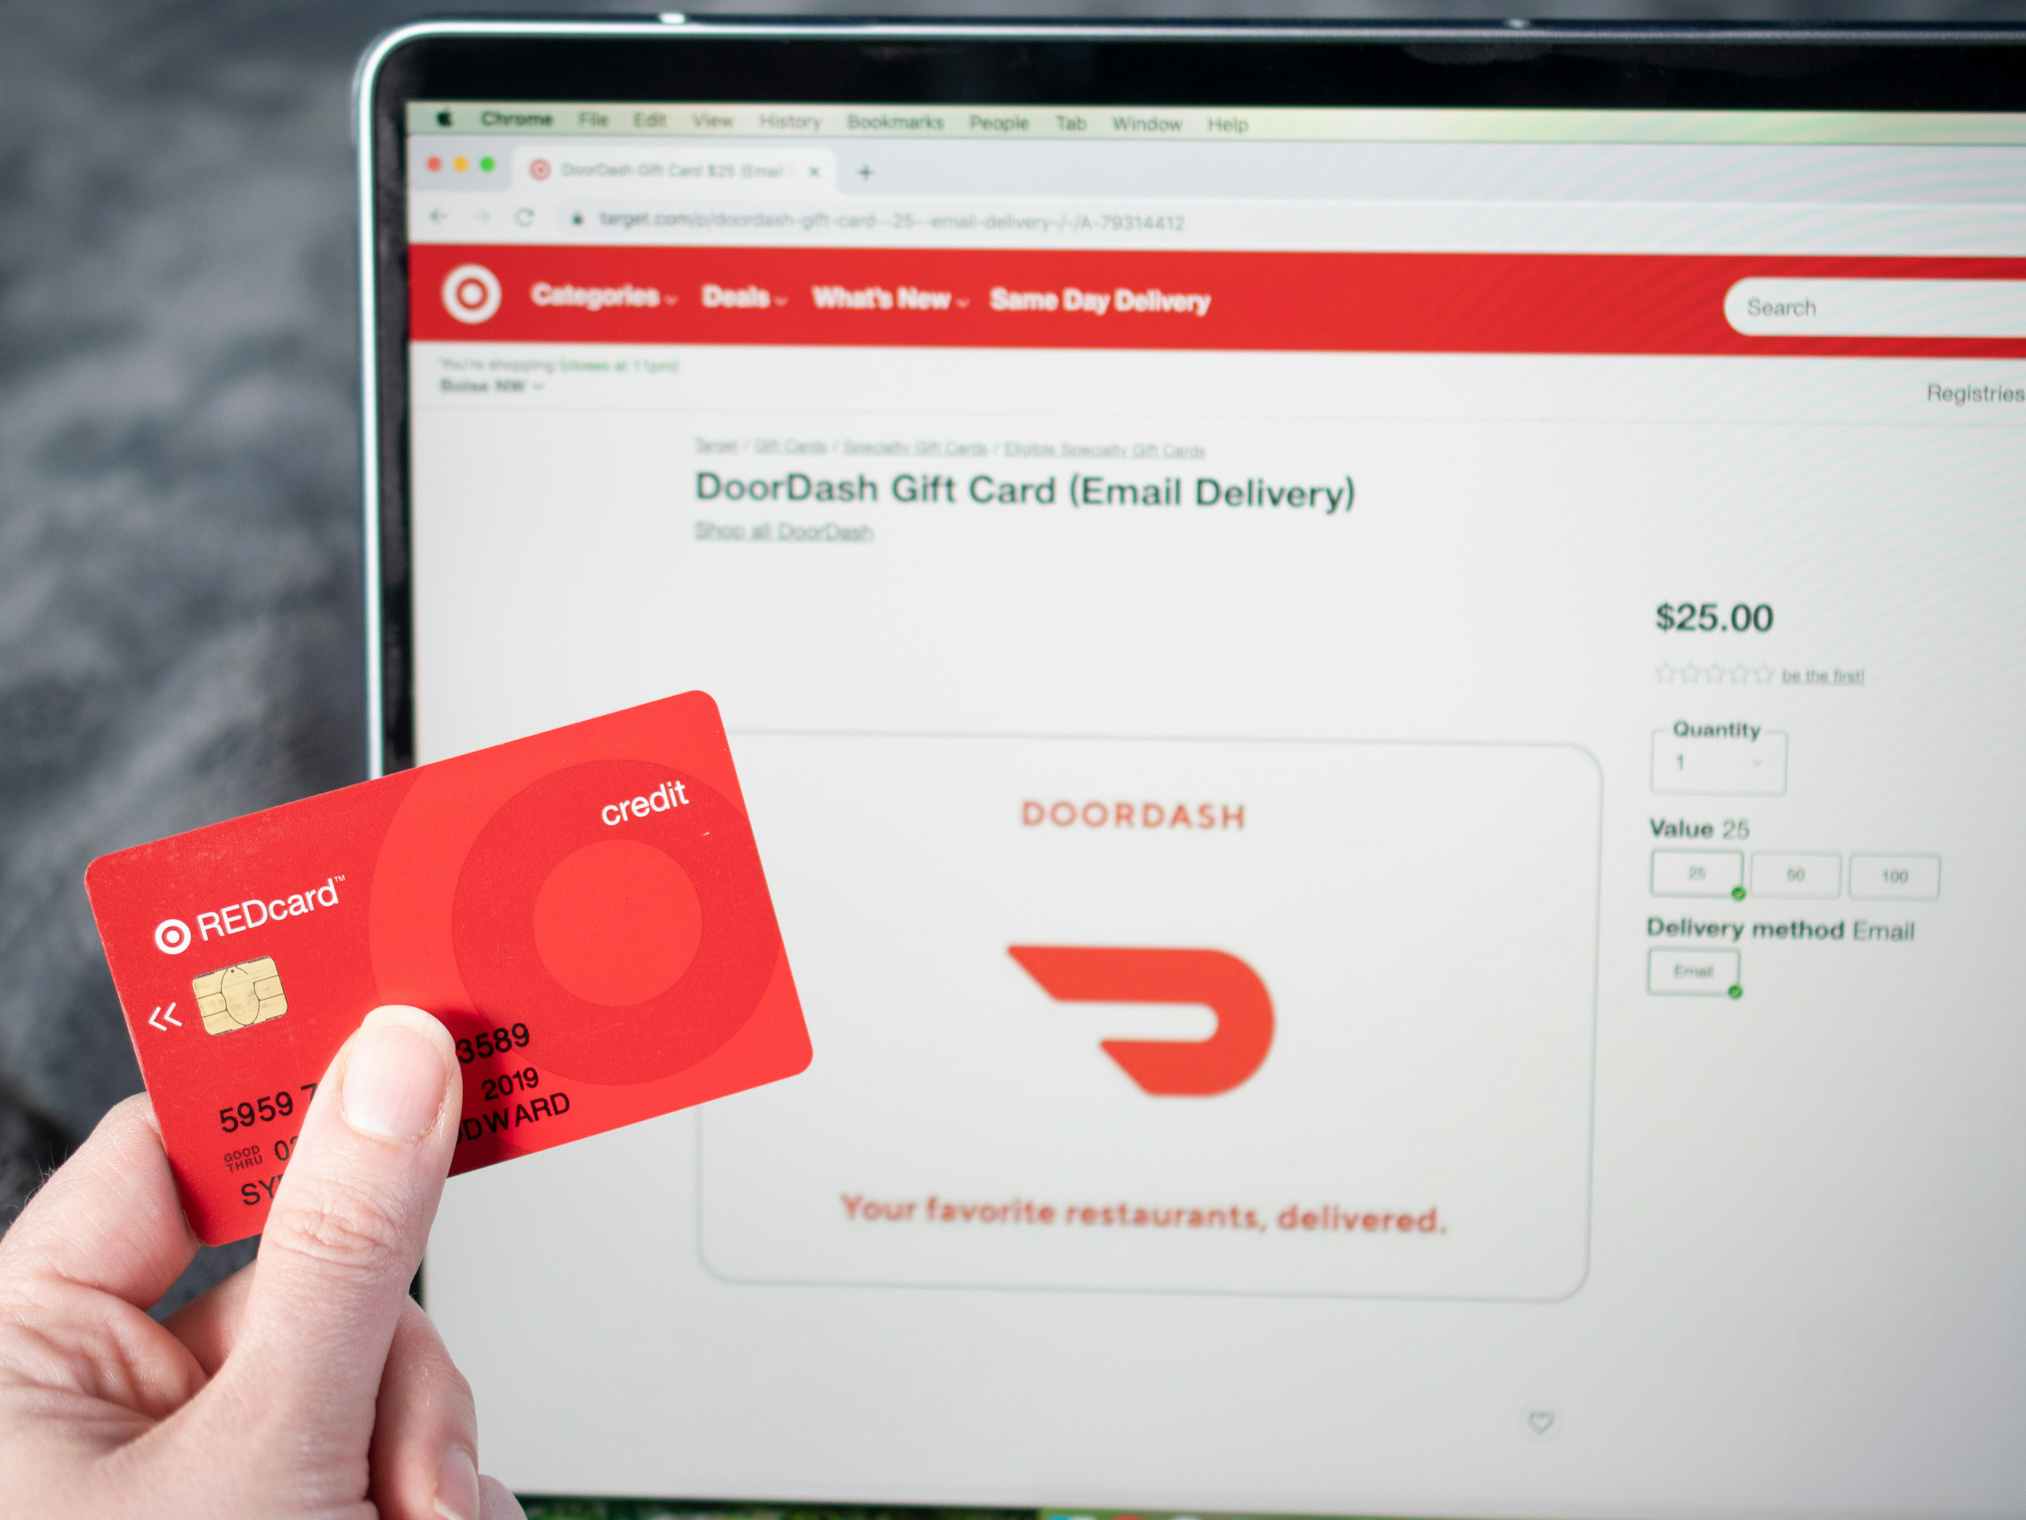 A hand holding a target red card in front of a computer screen showing DoorDash email gift cards on Target.com